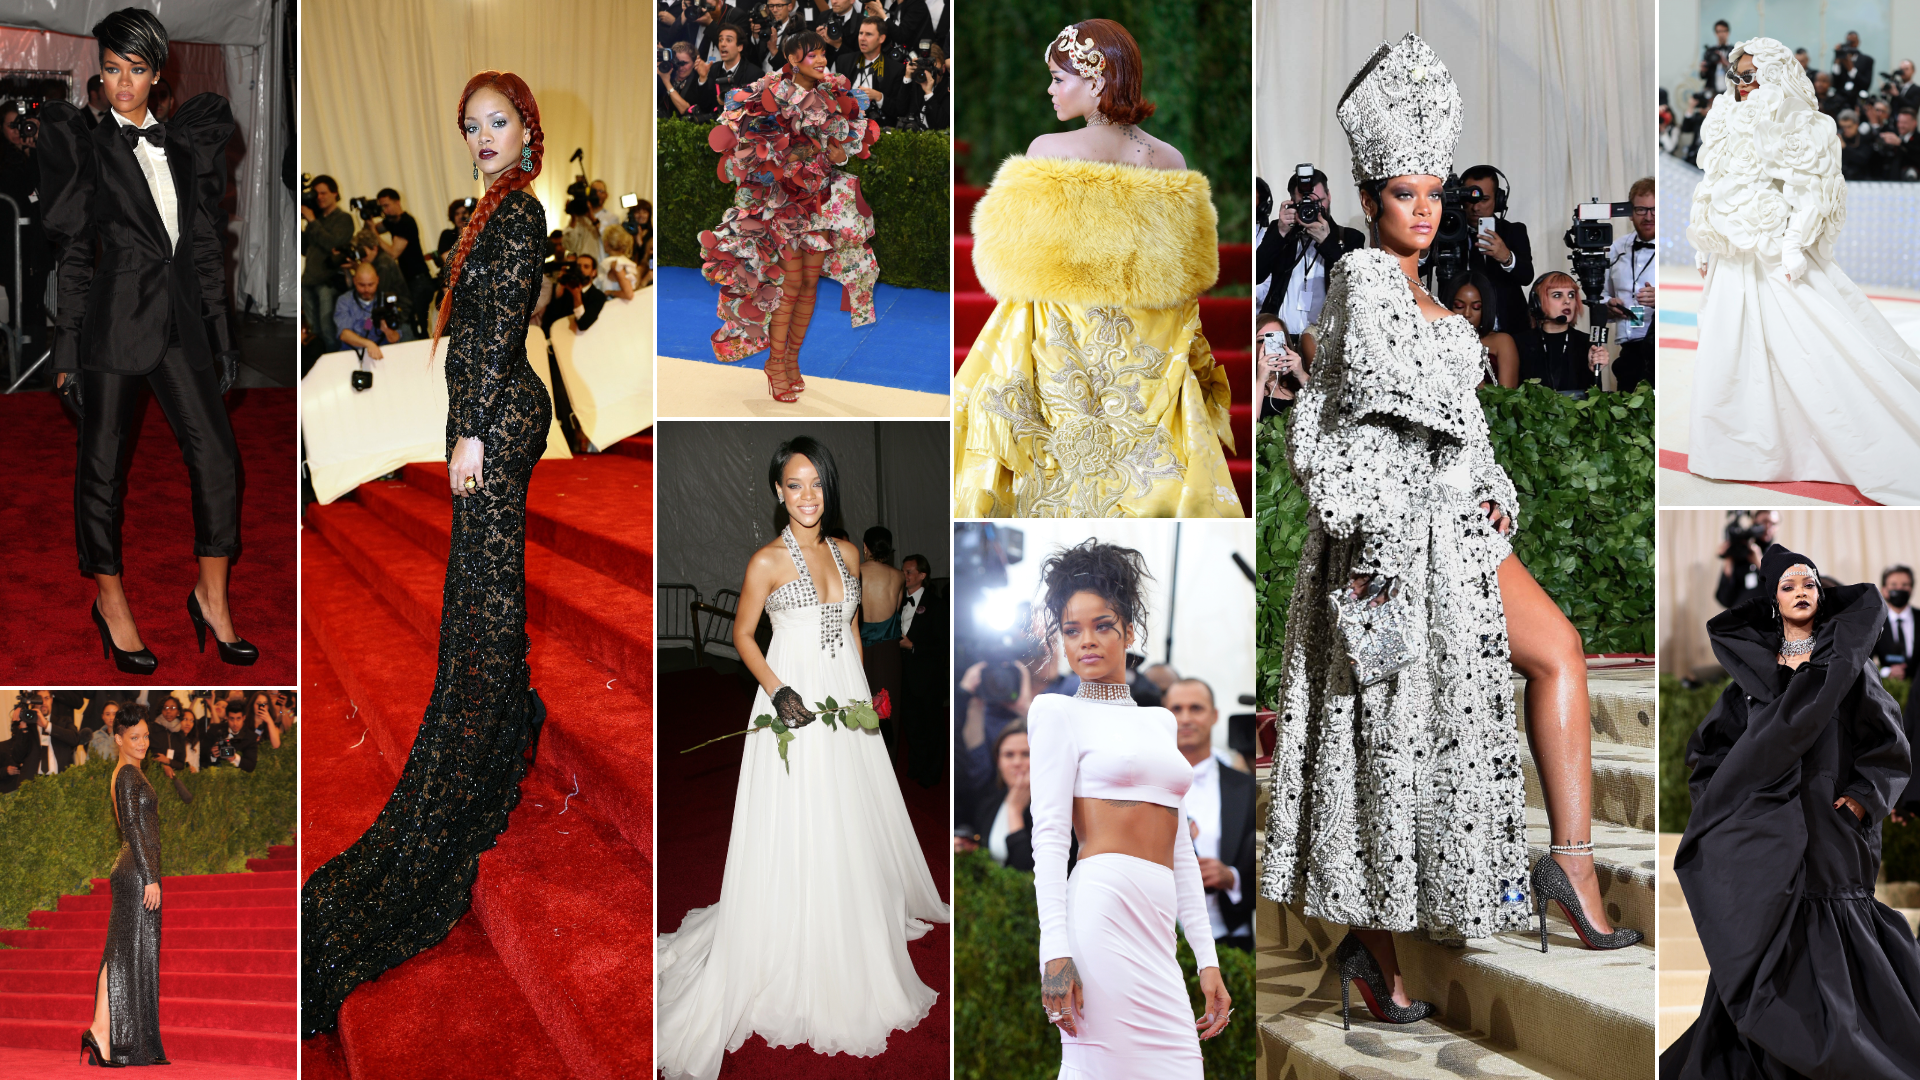 met gala live updates: mindy kaling, tyla offer stunning looks plus we explain the theme